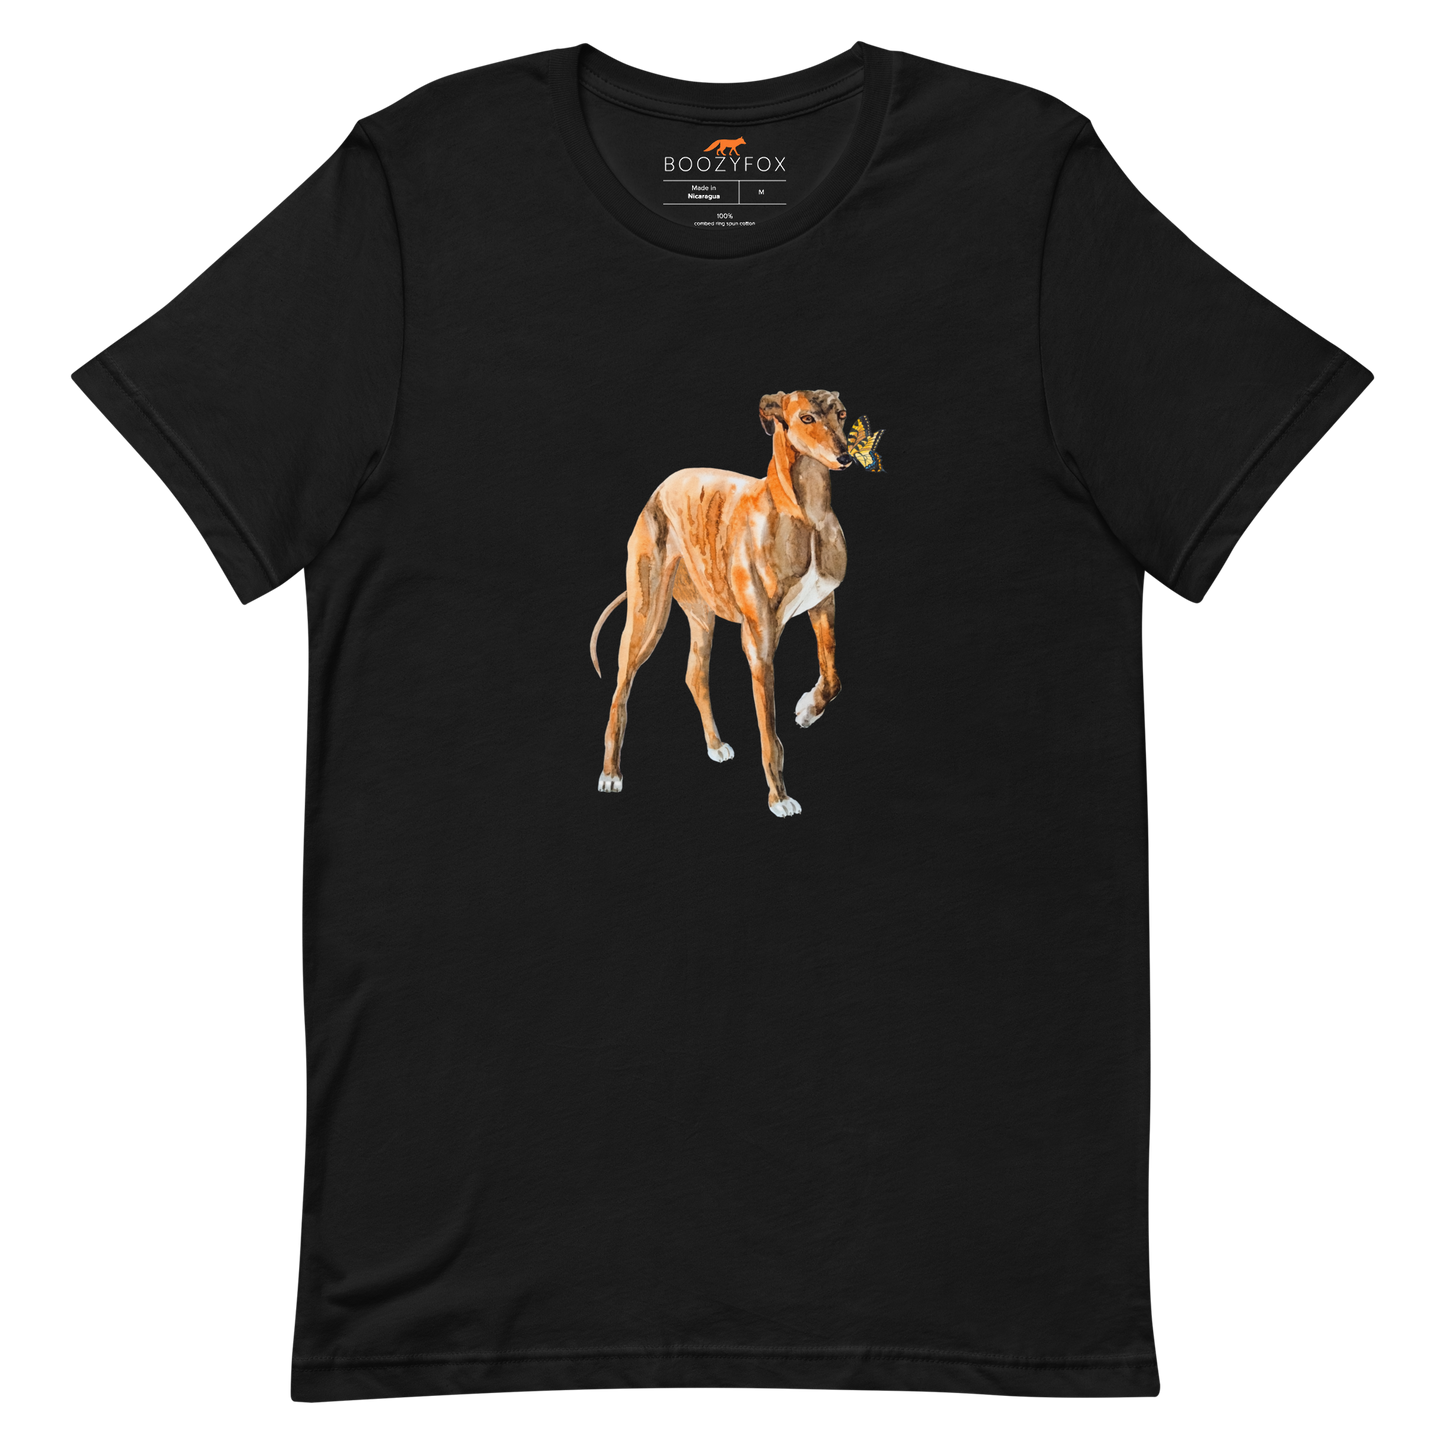 Black Premium Greyhound T-Shirt featuring an adorable Greyhound And Butterfly graphic on the chest - Cute Graphic Greyhound Tees - Boozy Fox